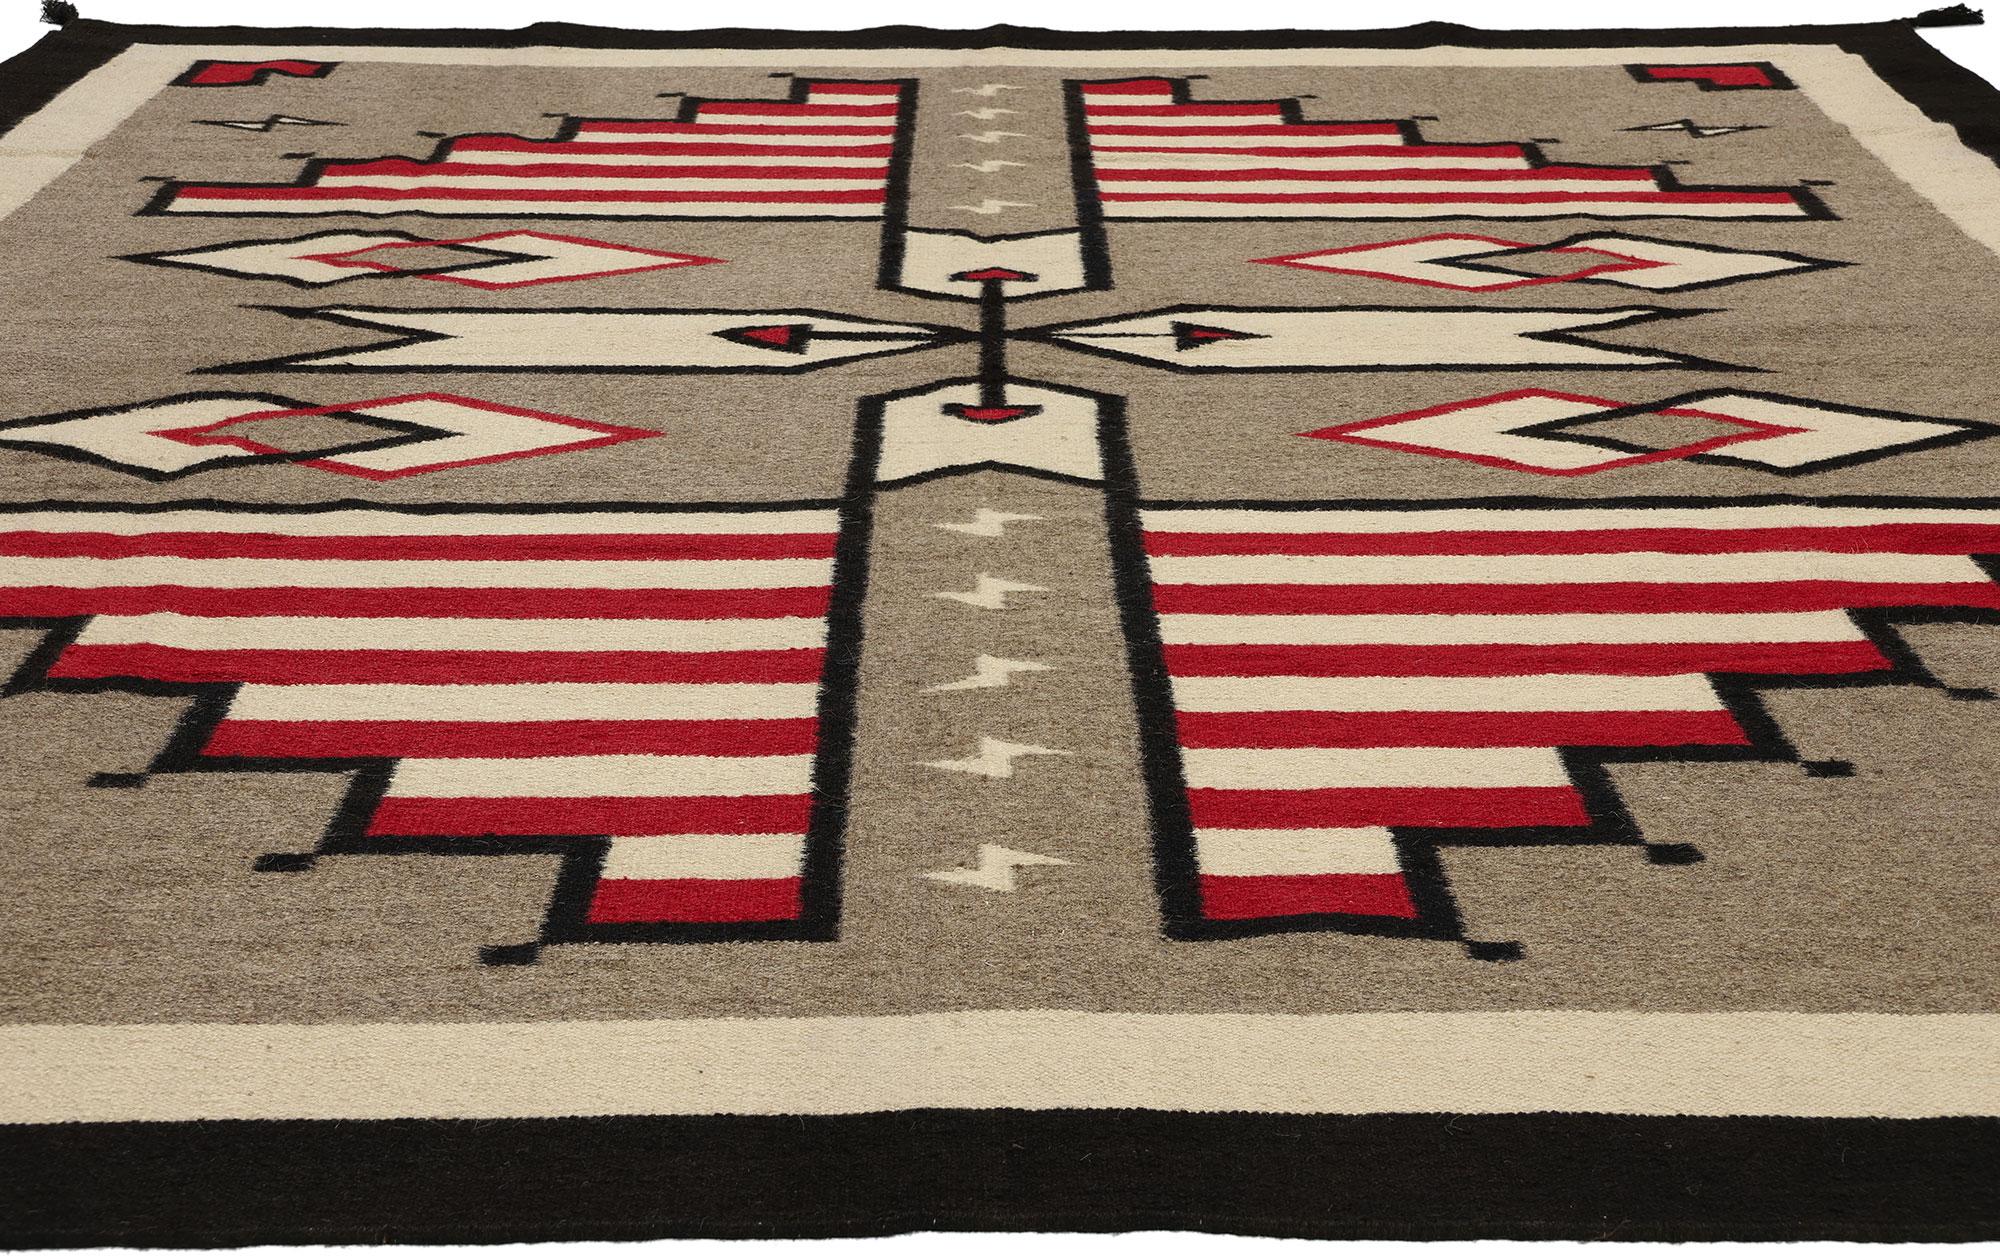 South Asian Contemporary Santa Fe Southwest Modern Navajo-Style Rug For Sale